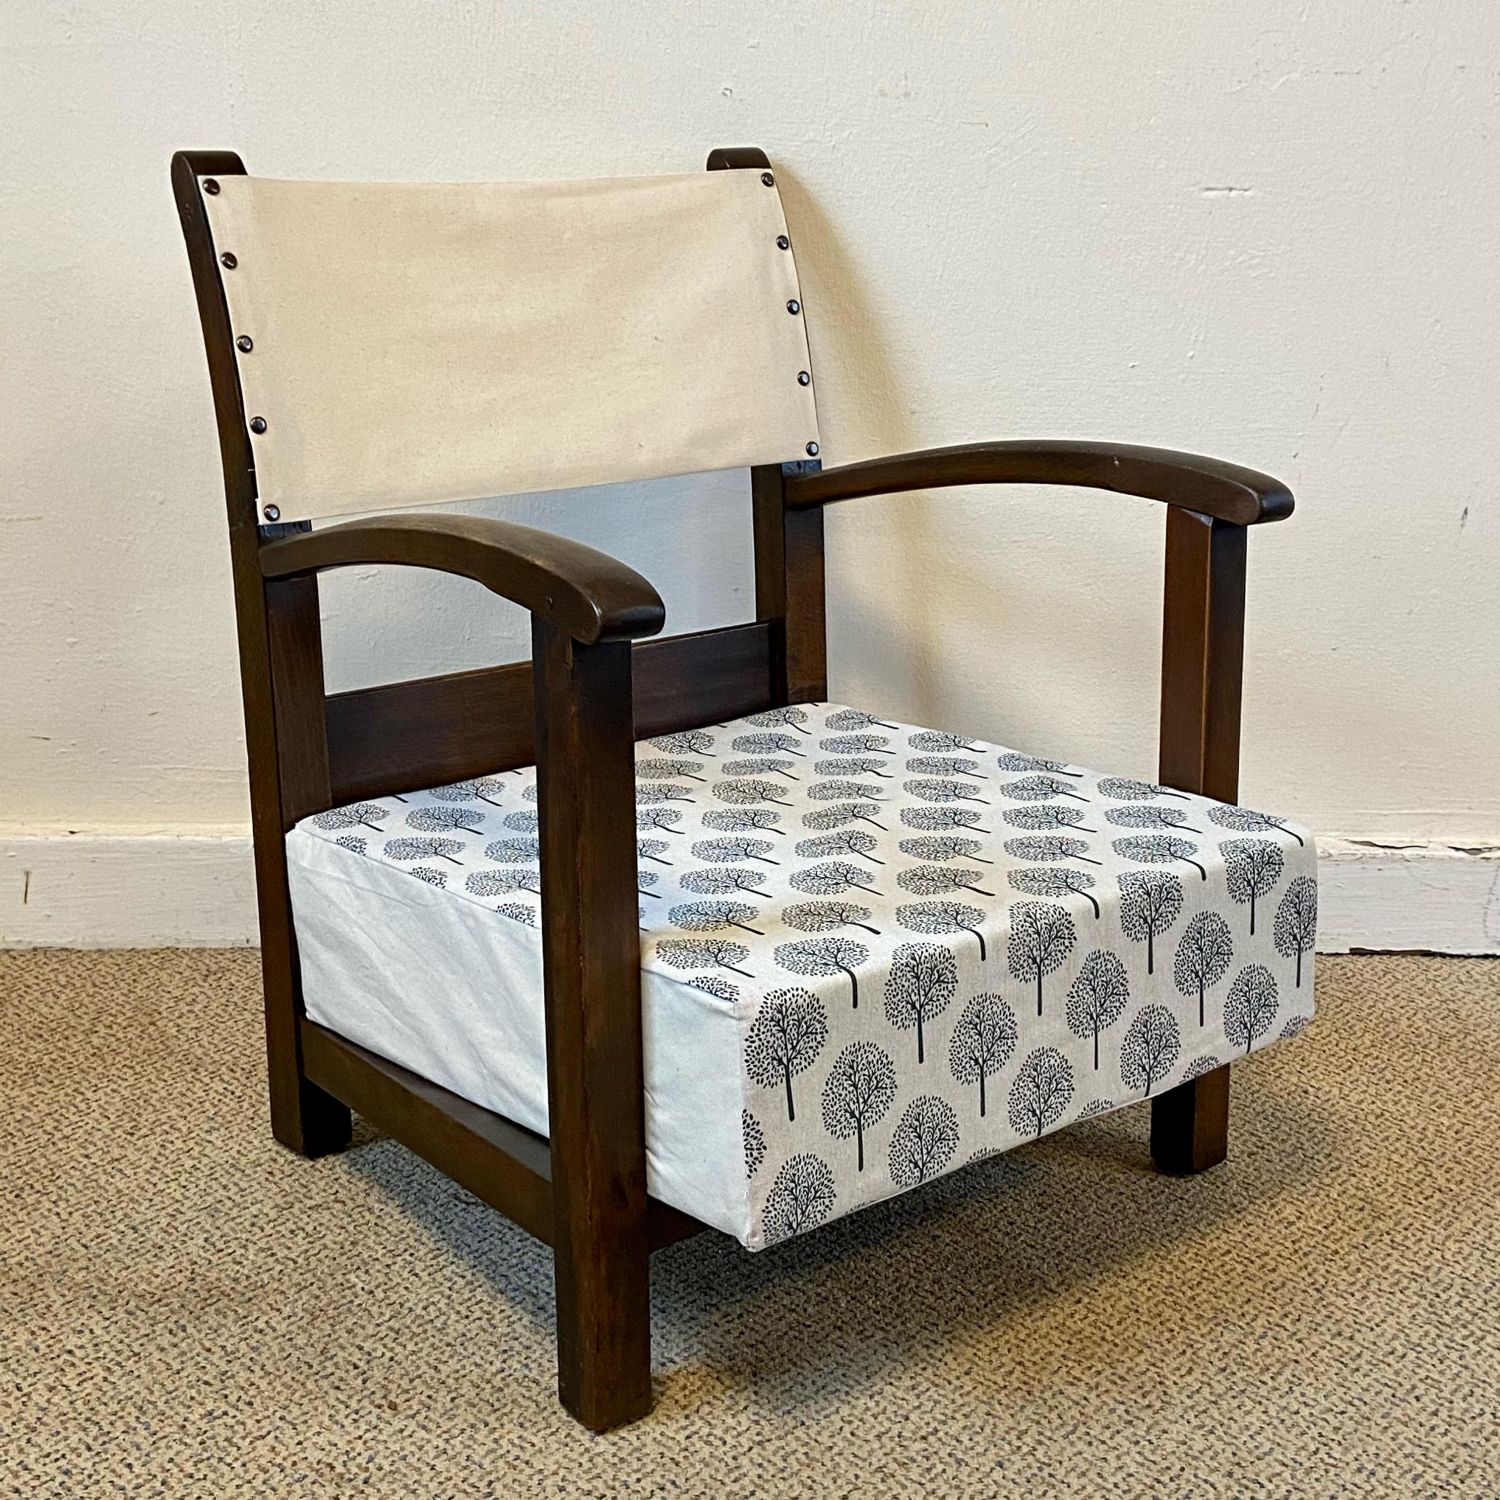 19th Century Oak Childs Low Chair with White Patterned Cushion